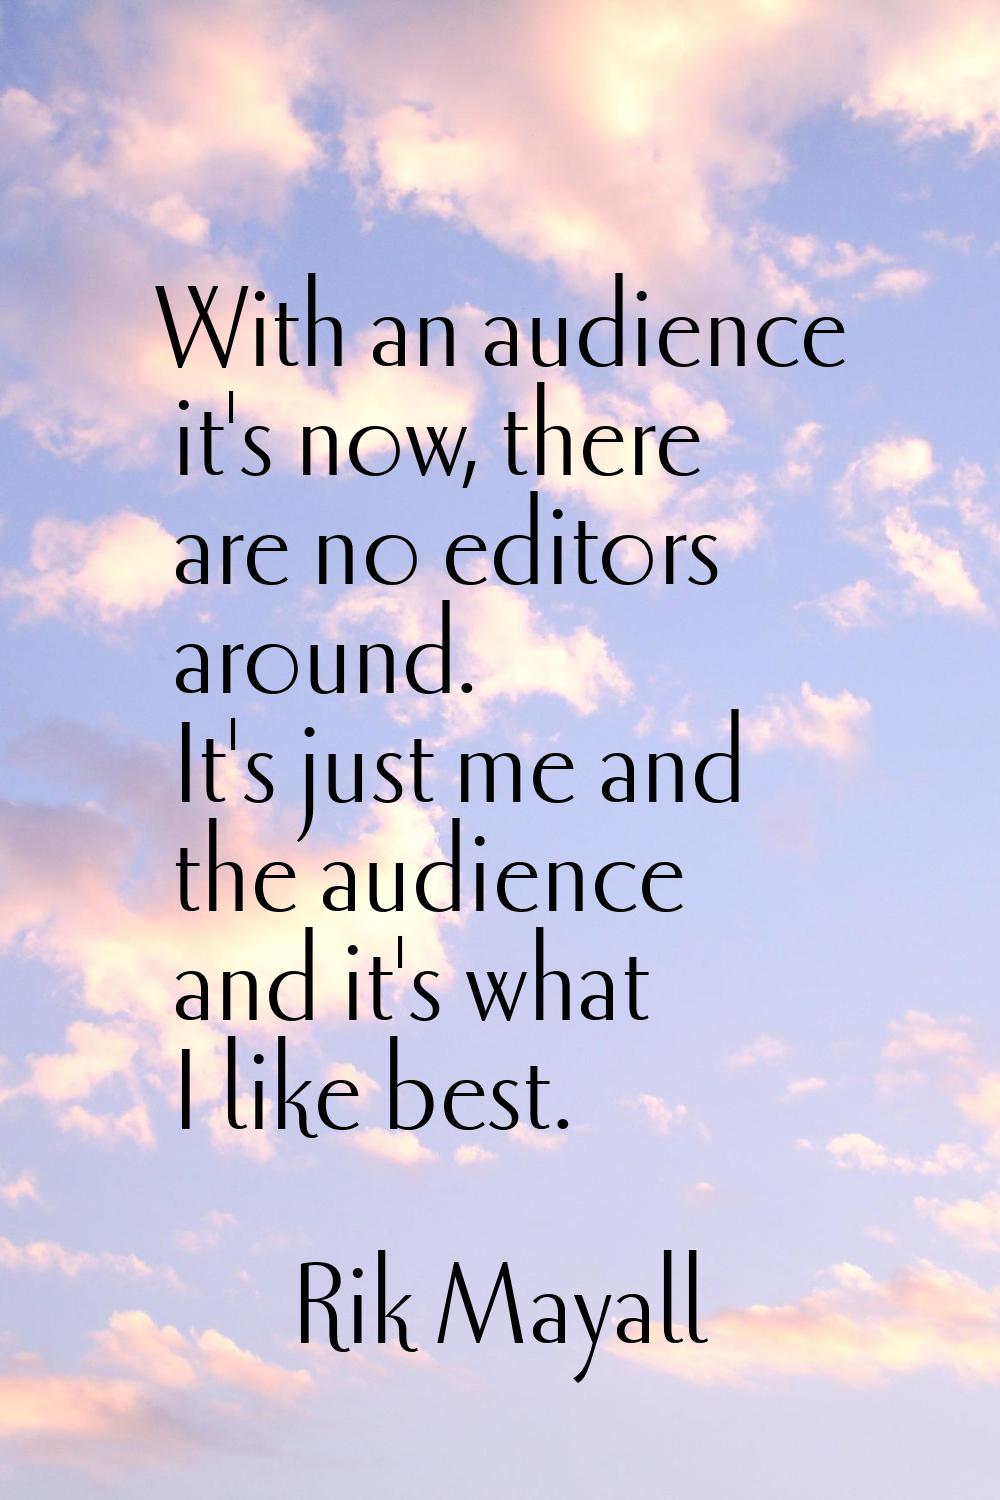 With an audience it's now, there are no editors around. It's just me and the audience and it's what